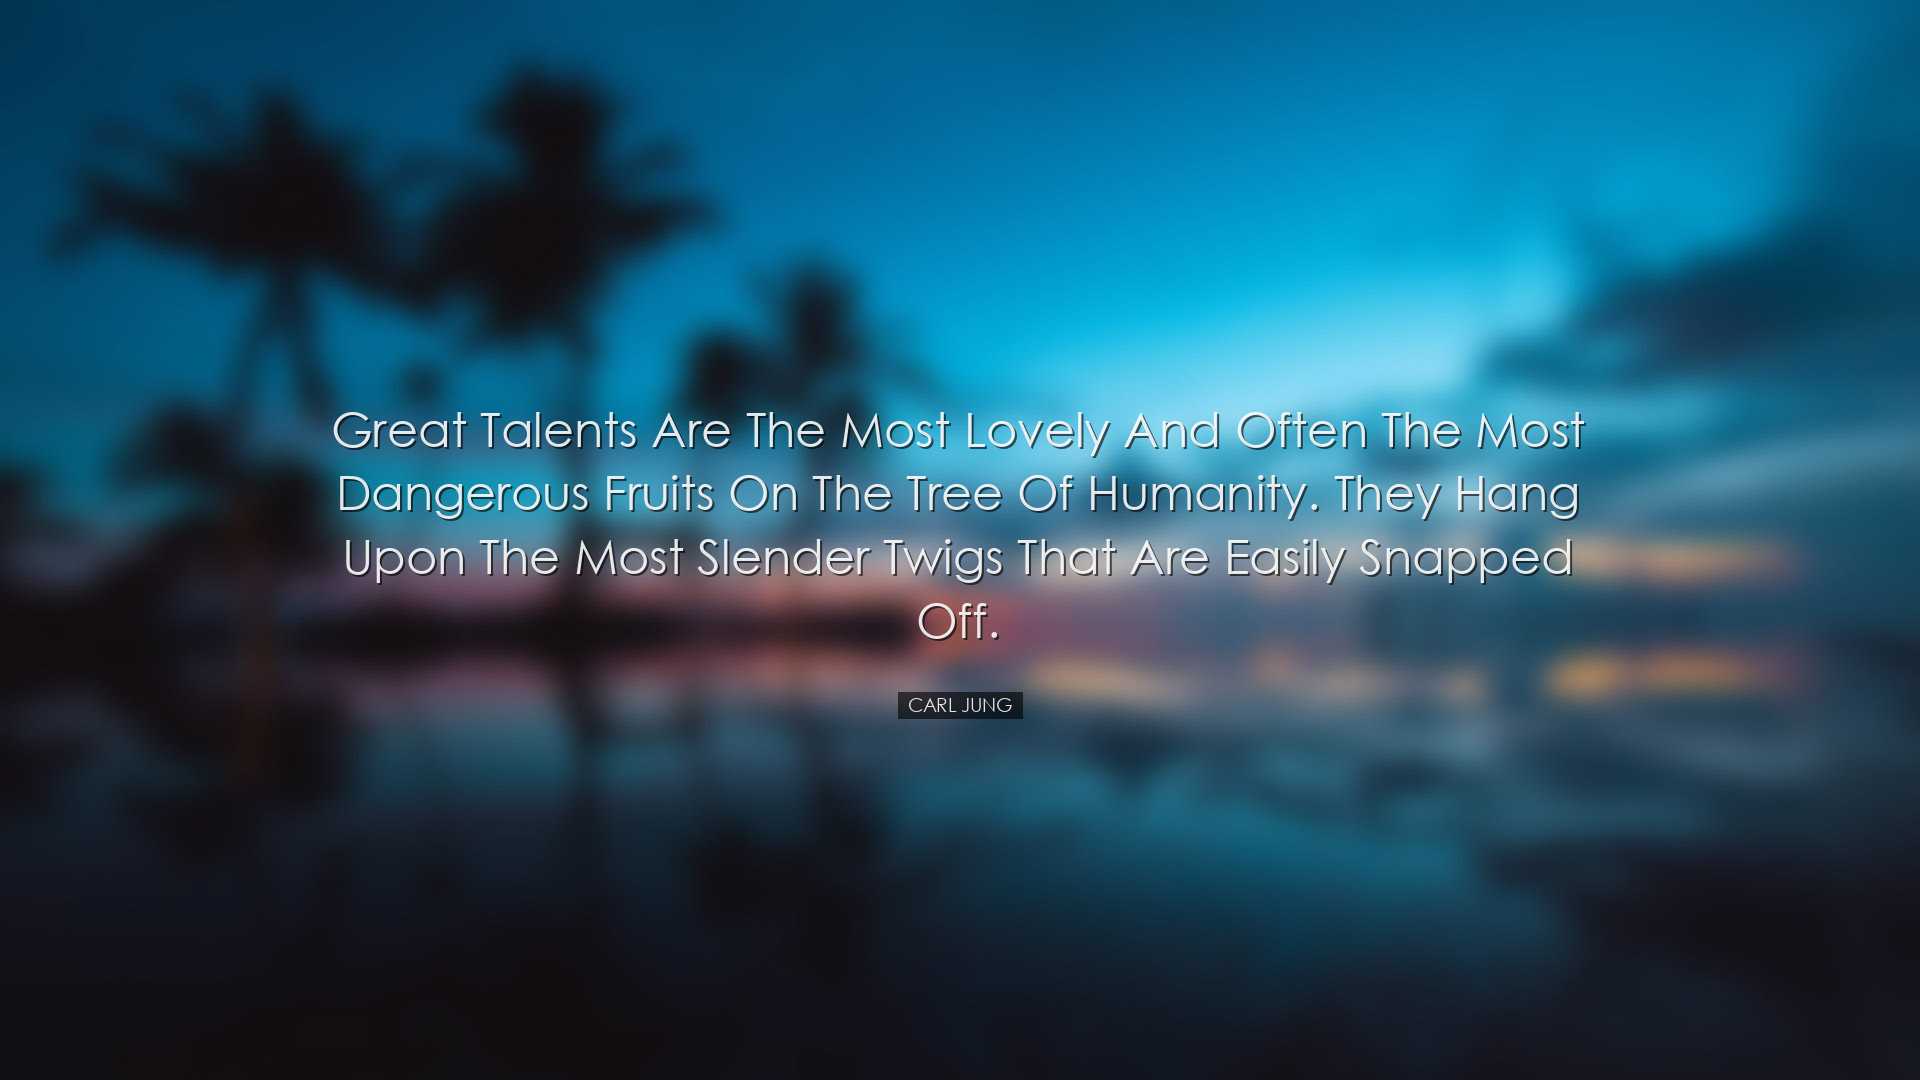 Great talents are the most lovely and often the most dangerous fru